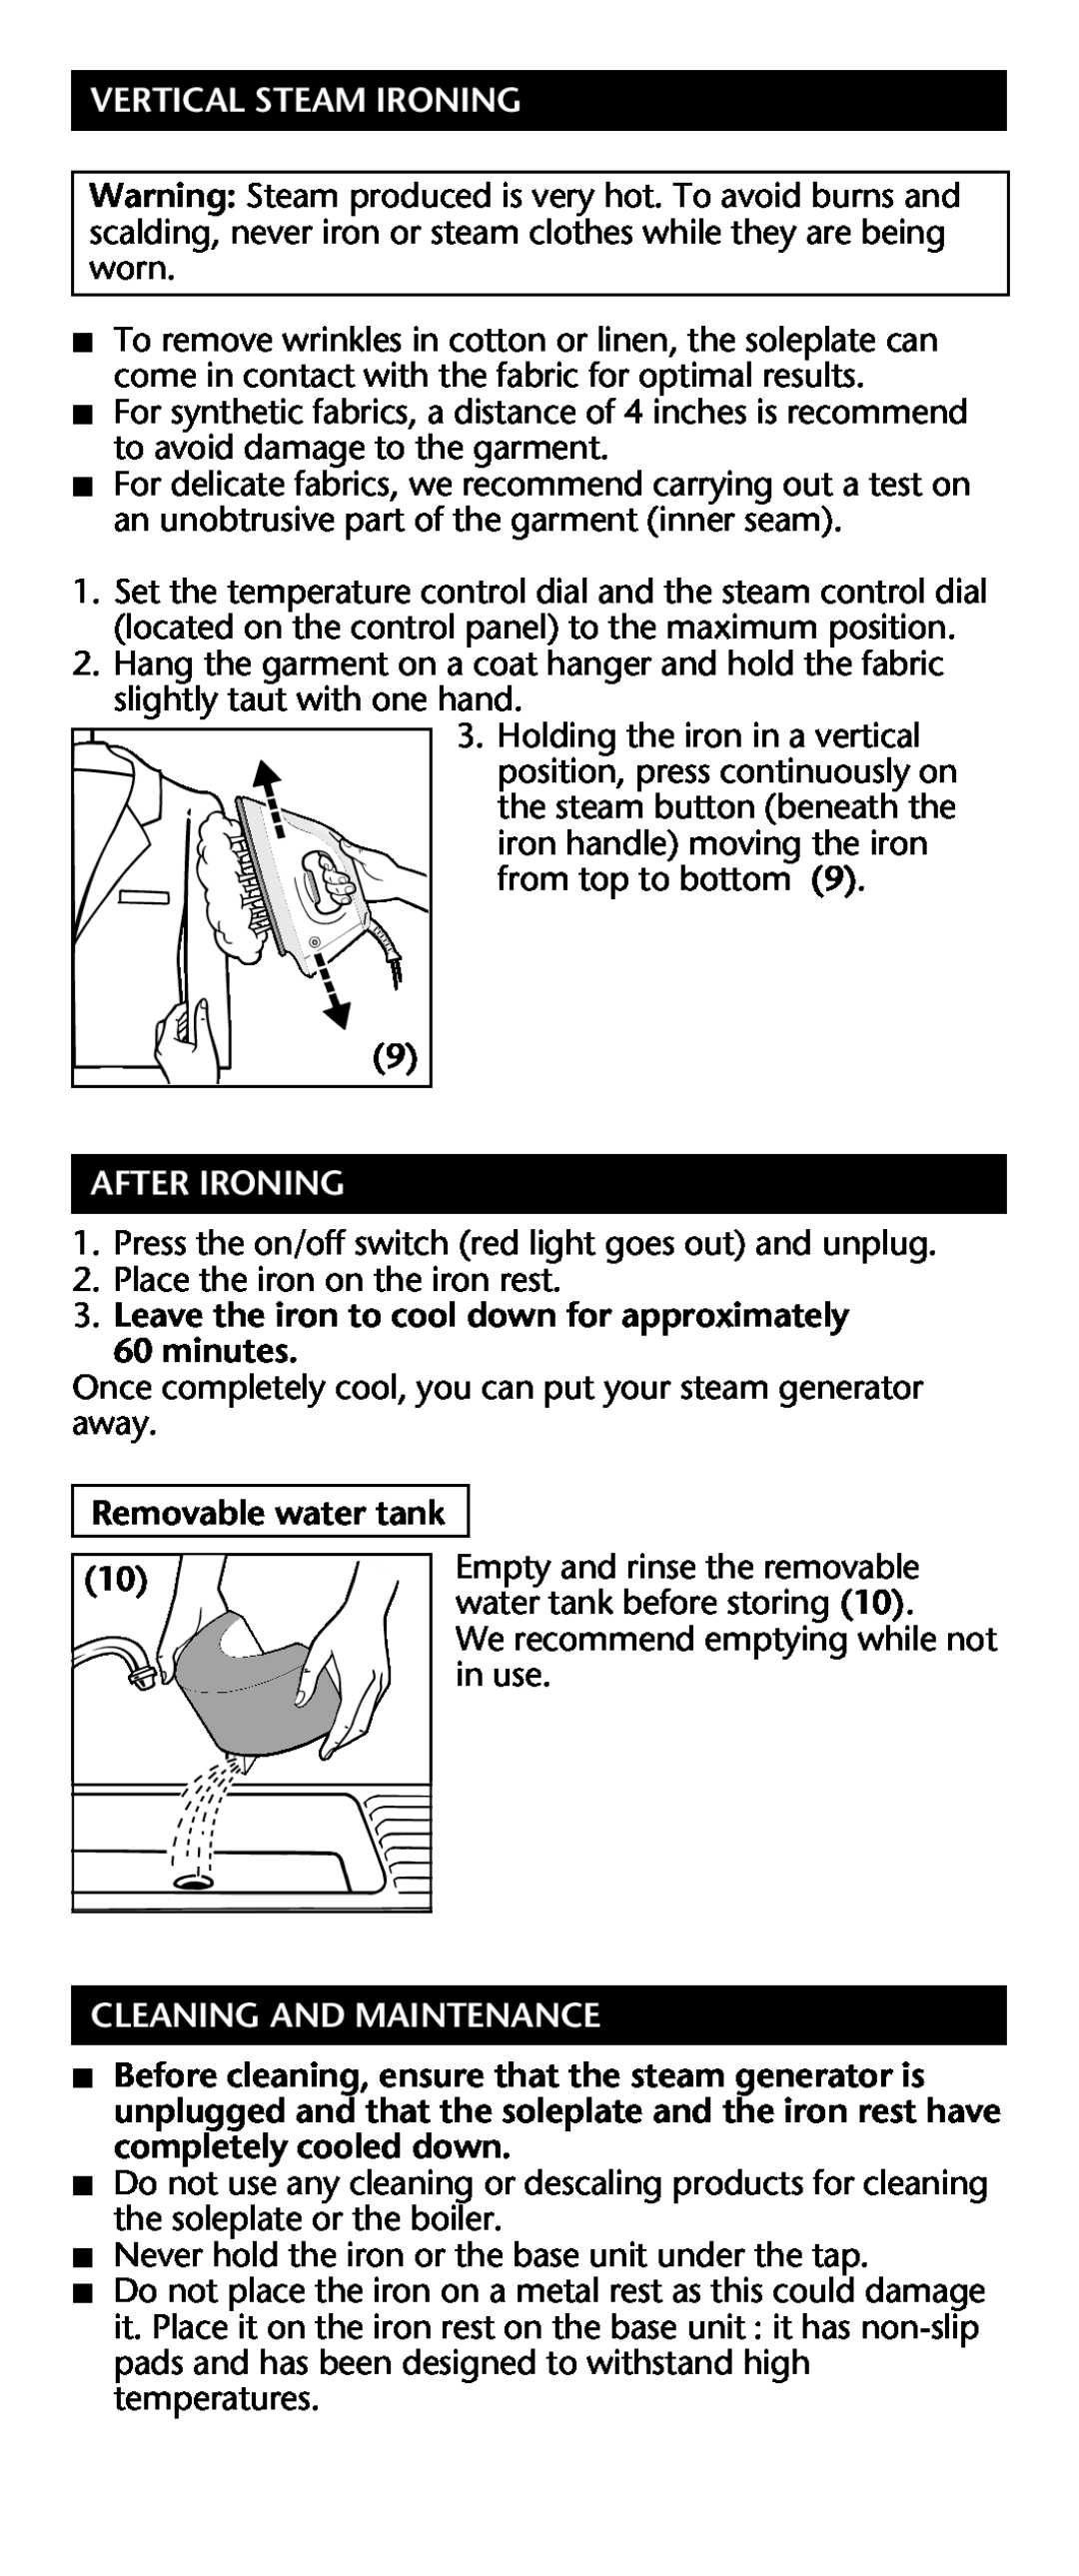 Rowenta Werke manual Vertical Steam Ironing, After Ironing, Leave the iron to cool down for approximately 60 minutes 